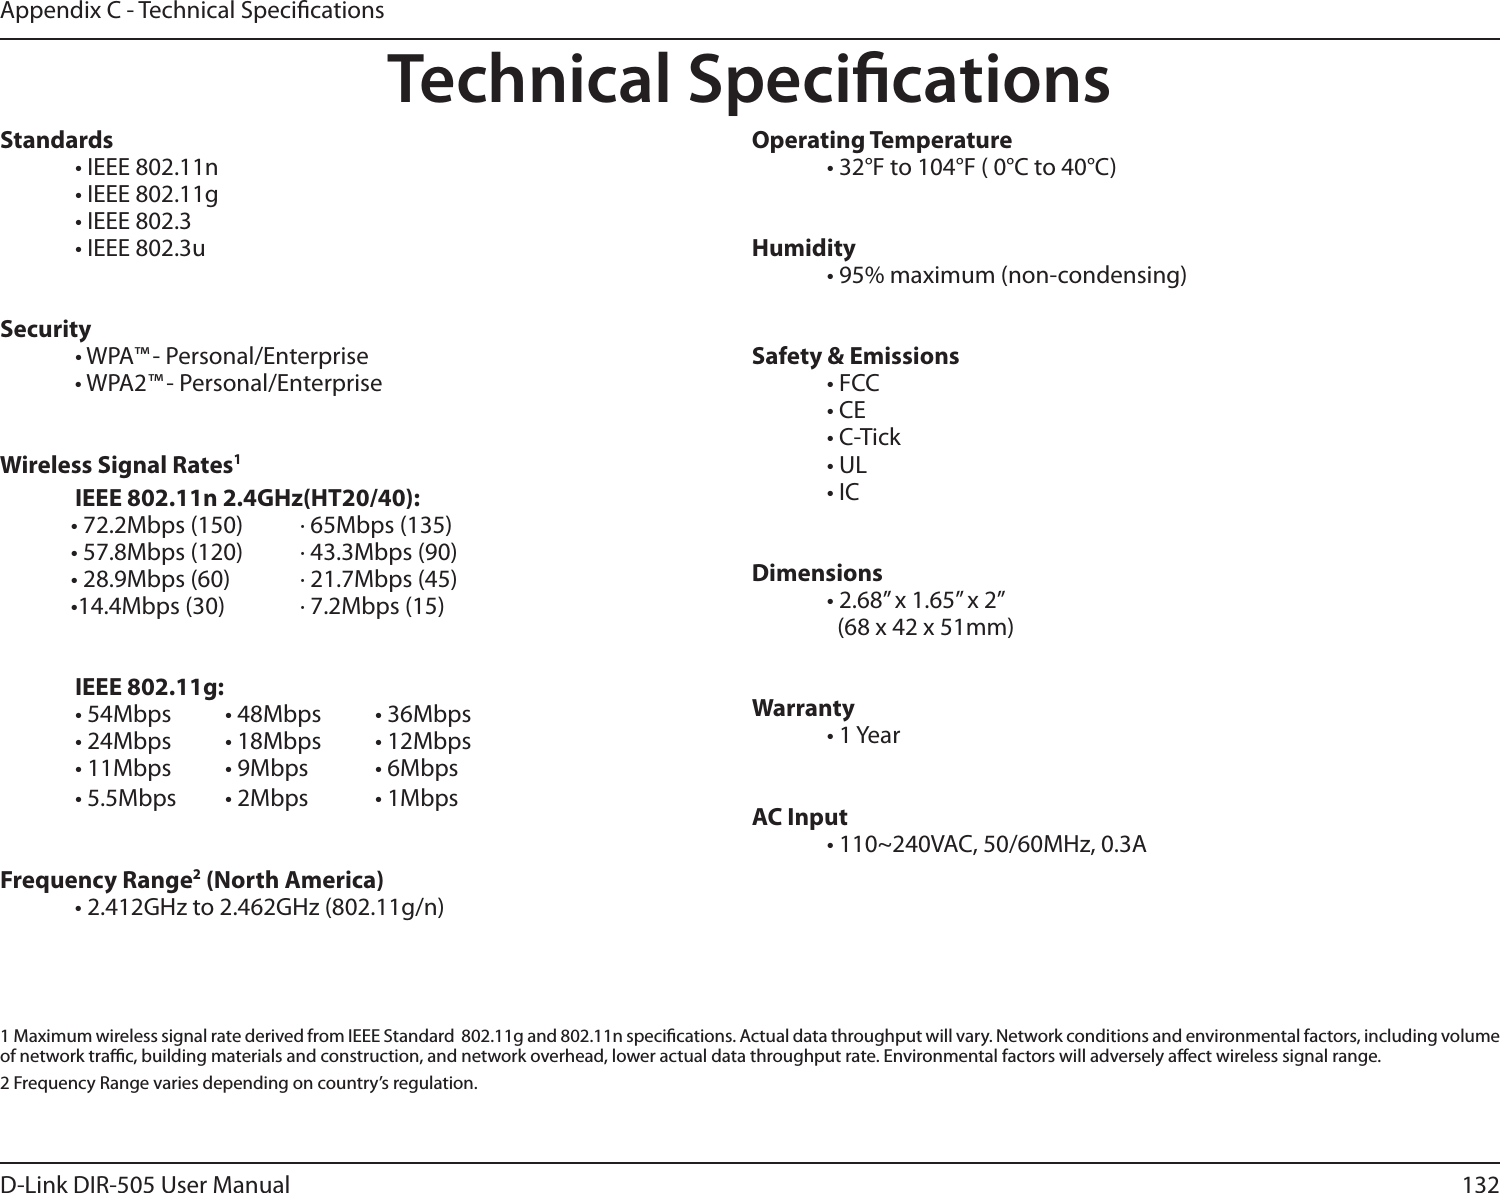 132D-Link DIR-505 User ManualAppendix C - Technical Speci cationsTechnical Speci cationsStandards  • IEEE 802.11n  • IEEE 802.11g  • IEEE 802.3  • IEEE 802.3uSecurity • WPA™ - Personal/Enterprise • WPA2™ - Personal/Enterprise Wireless Signal Rates1  IEEE 802.11n 2.4GHz(HT20/40):• 72.2Mbps (150)       · 65Mbps (135)• 57.8Mbps (120)       · 43.3Mbps (90)• 28.9Mbps (60)  · 21.7Mbps (45)•14.4Mbps (30)  · 7.2Mbps (15) IEEE 802.11g:  • 54Mbps  • 48Mbps  • 36Mbps  • 24Mbps  • 18Mbps  • 12Mbps  • 11Mbps  • 9Mbps  • 6Mbps  • 5.5Mbps  • 2Mbps  • 1MbpsFrequency Range2 (North America)  • 2.412GHz to 2.462GHz (802.11g/n)Operating Temperature  • 32°F to 104°F ( 0°C to 40°C)Humidity  • 95% maximum (non-condensing)Safety &amp; Emissions  • FCC   • CE • C-Tick • UL • ICDimensions  • 2.68” x 1.65” x 2”    (68 x 42 x 51mm)Warranty • 1 YearAC Input  • 110~240VAC, 50/60MHz, 0.3A1  Maximum wireless signal rate derived from IEEE Standard  802.11g and 802.11n speci cations. Actual data throughput will vary. Network conditions and environmental factors, including volume of network tra  c, building materials and construction, and network overhead, lower actual data throughput rate. Environmental factors will adversely a ect wireless signal range.2 Frequency Range varies depending on country’s regulation.